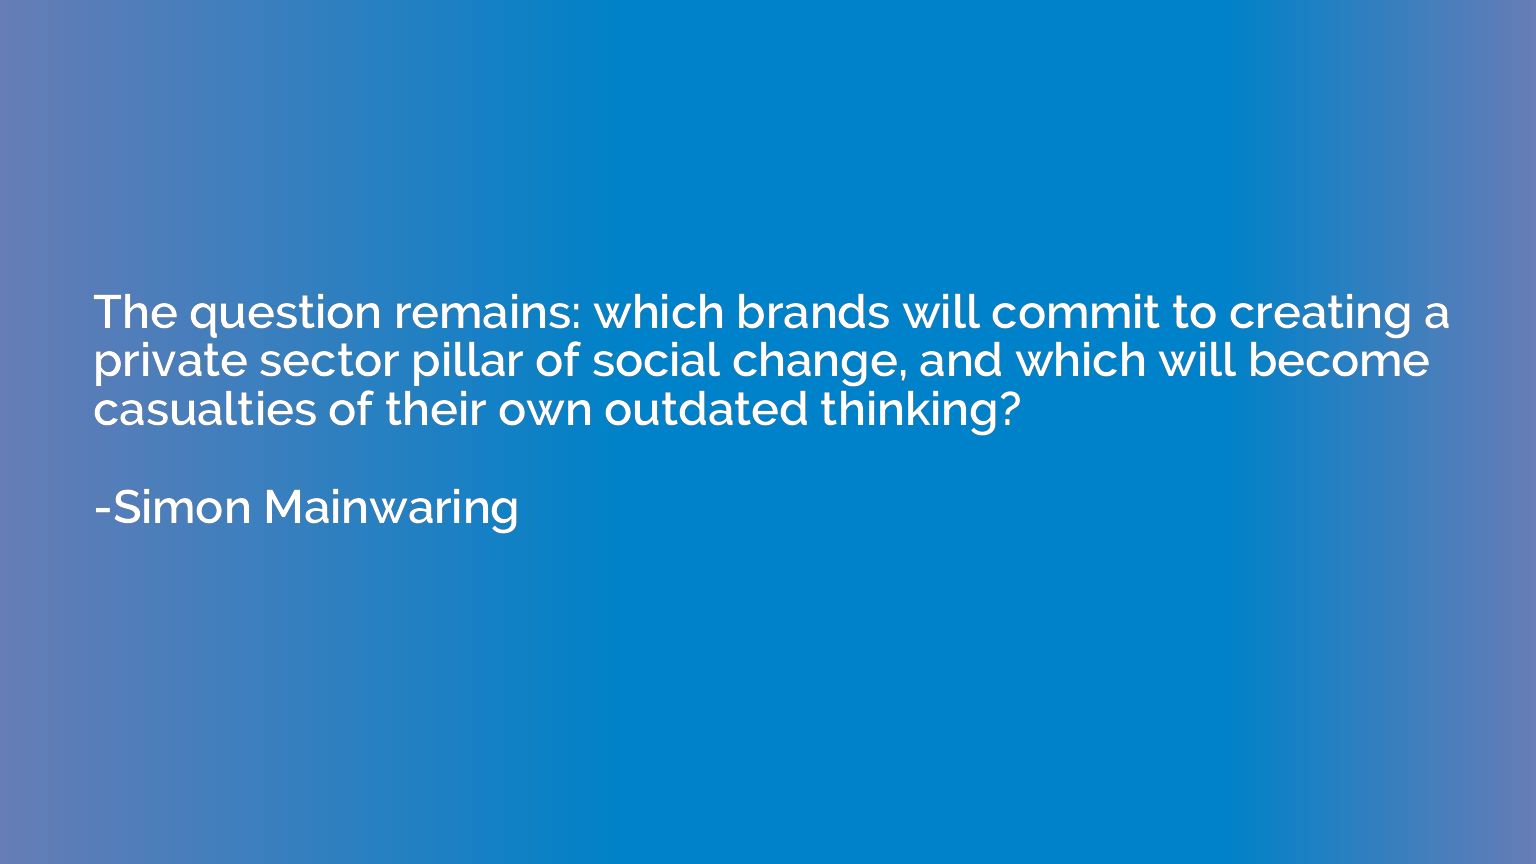 The question remains: which brands will commit to creating a